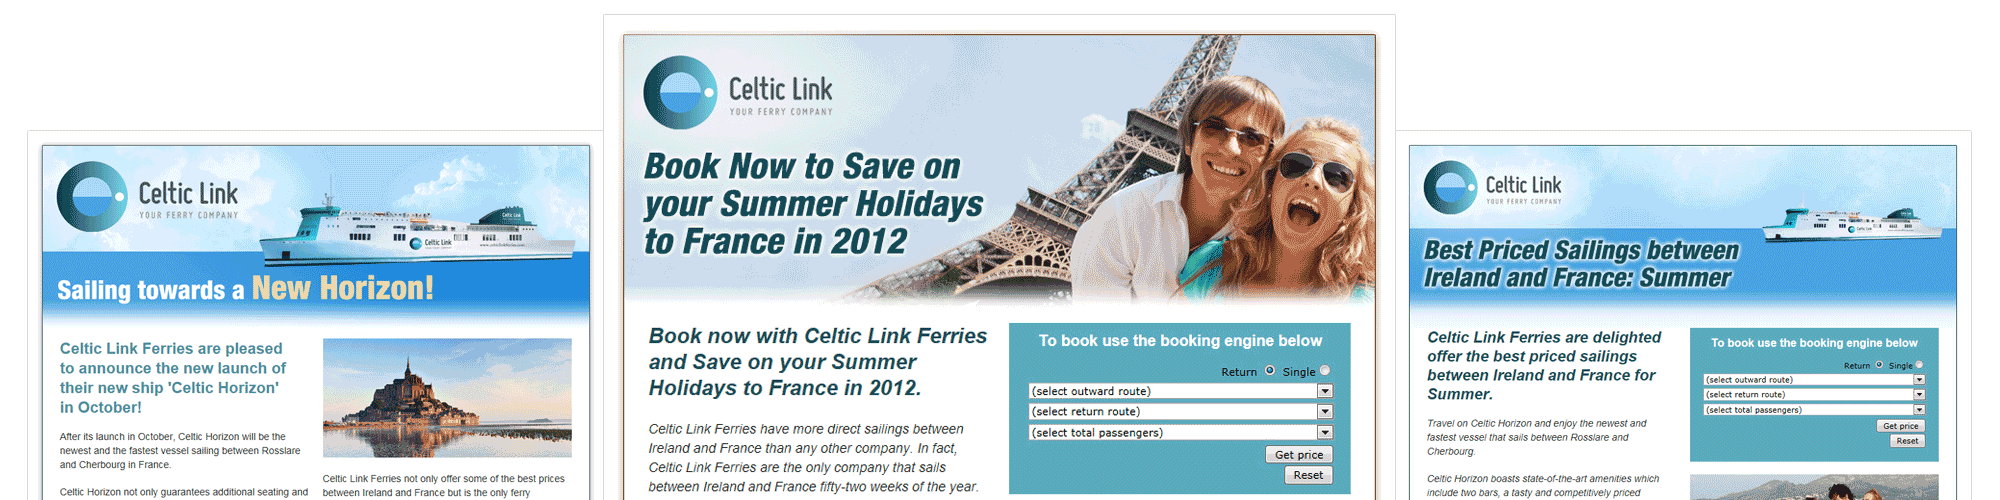 Screenshot of the Celtic Link Ferries case study by Michael Saunders